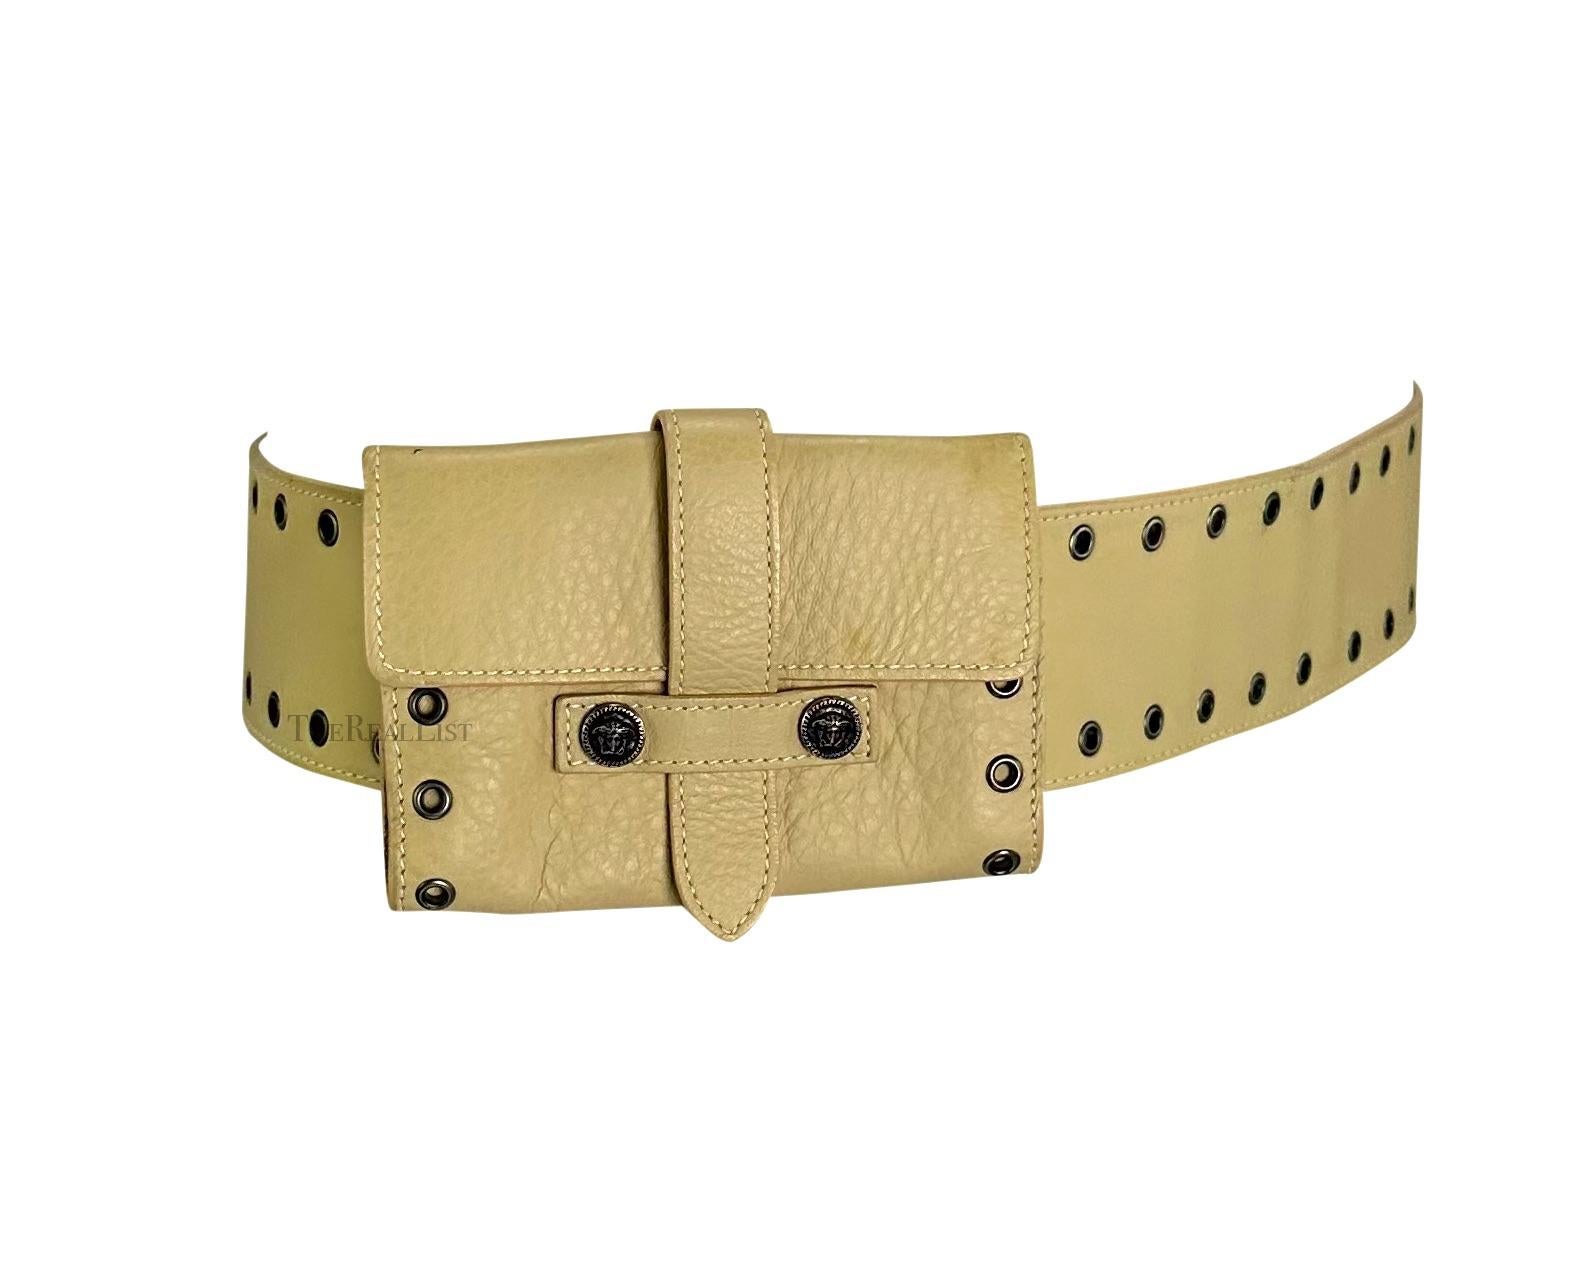 Presenting a fabulous light beige Gianni Versace leather waist bag belt, designed by Donatella Versace. From the early 2000s, this wide leather belt features a removable small envelope pouch, gunmetal eyelets, an adjustable peg closure, and two